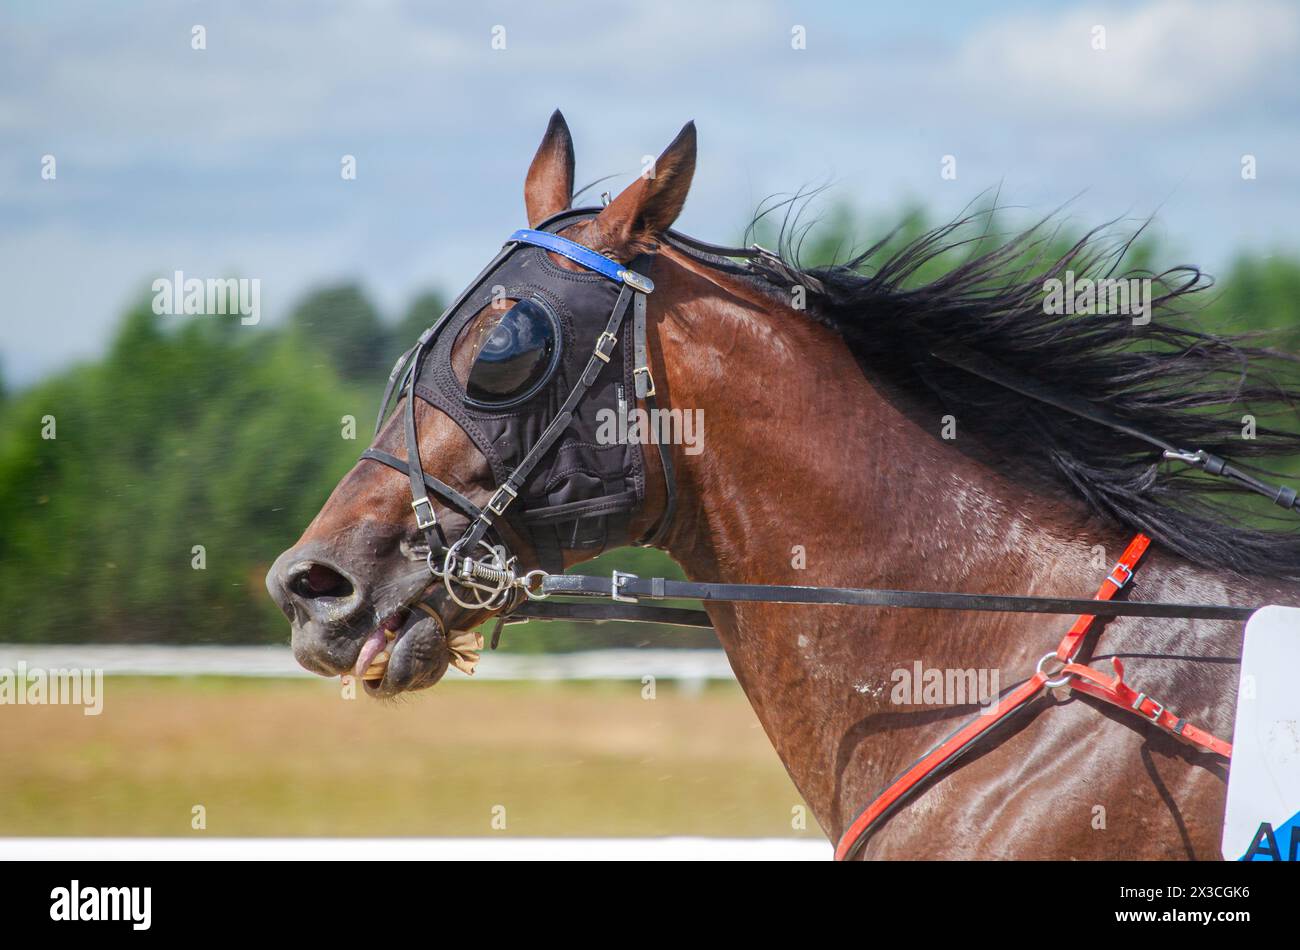 portrait of the head of a horse racing in an equestrian competition Stock Photo